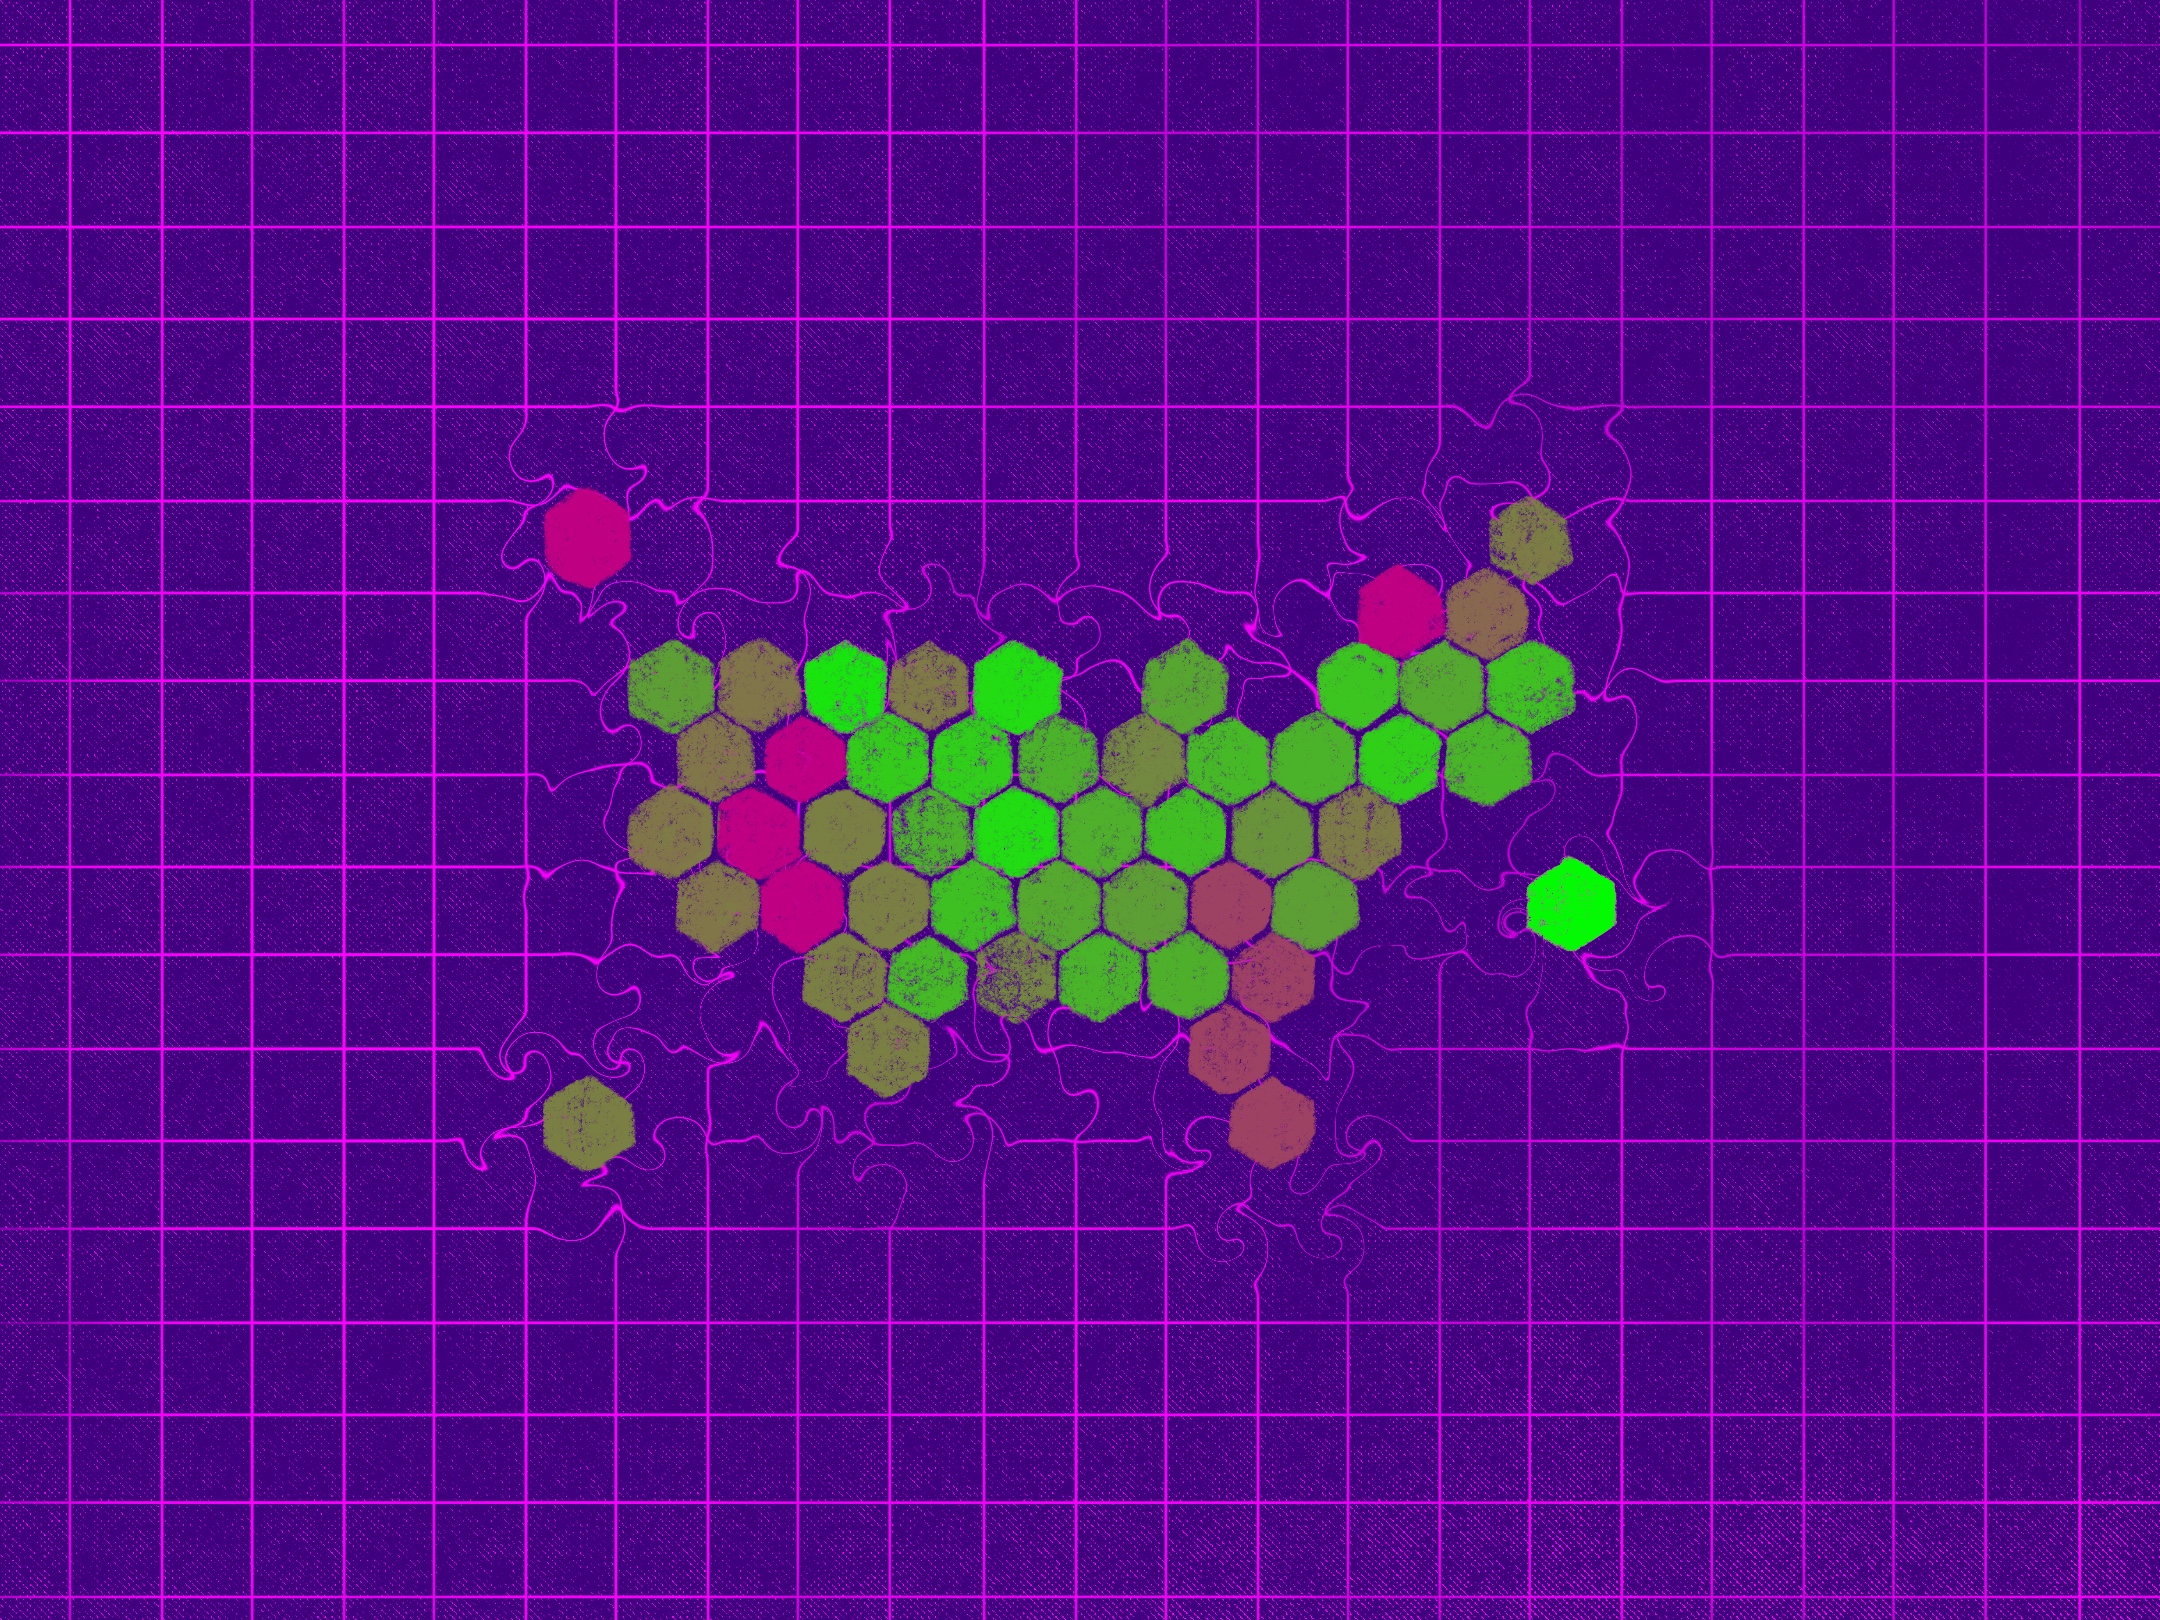 illustration of a hex map of the US. background is purple, states are green and pink